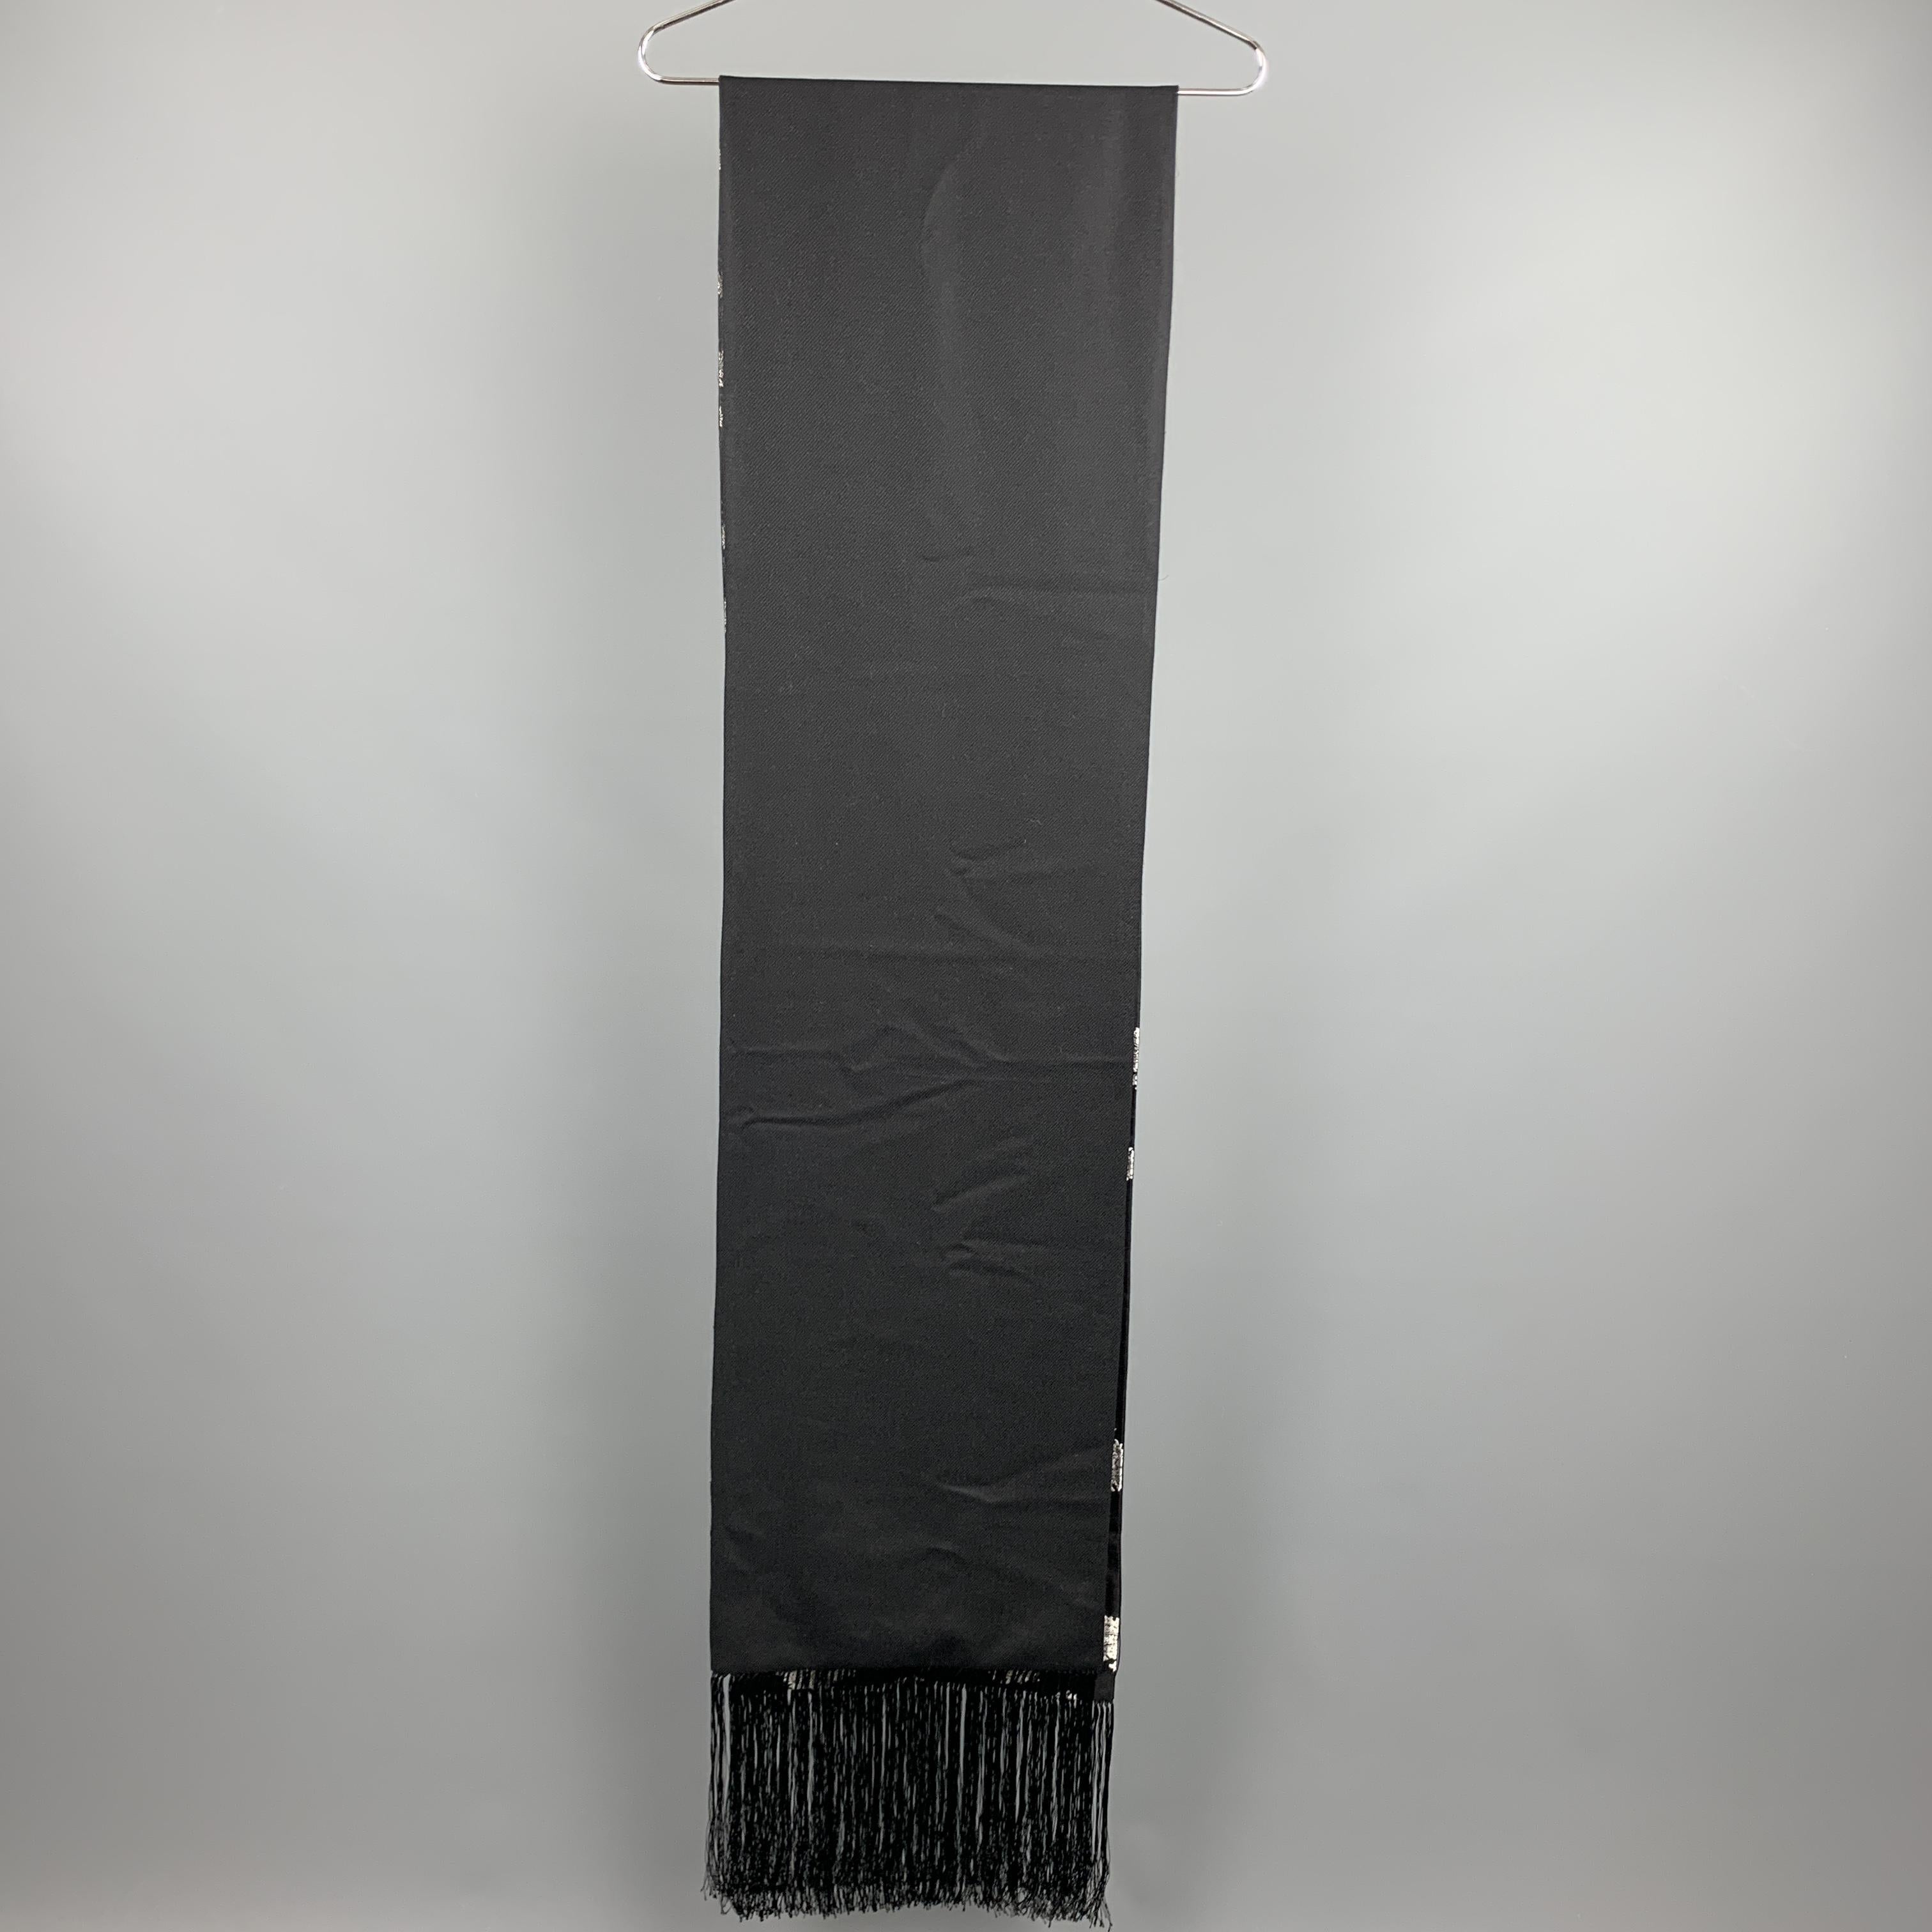 ALEXANDER MCQUEEN scarf comes in a black mixed fabrics silk featuring a oversized design, wool liner, and a eight and a half fringe trim. Made in Italy.

Excellent Pre-Owned Condition.

Measurements:

99 in. x 12.5 in. 